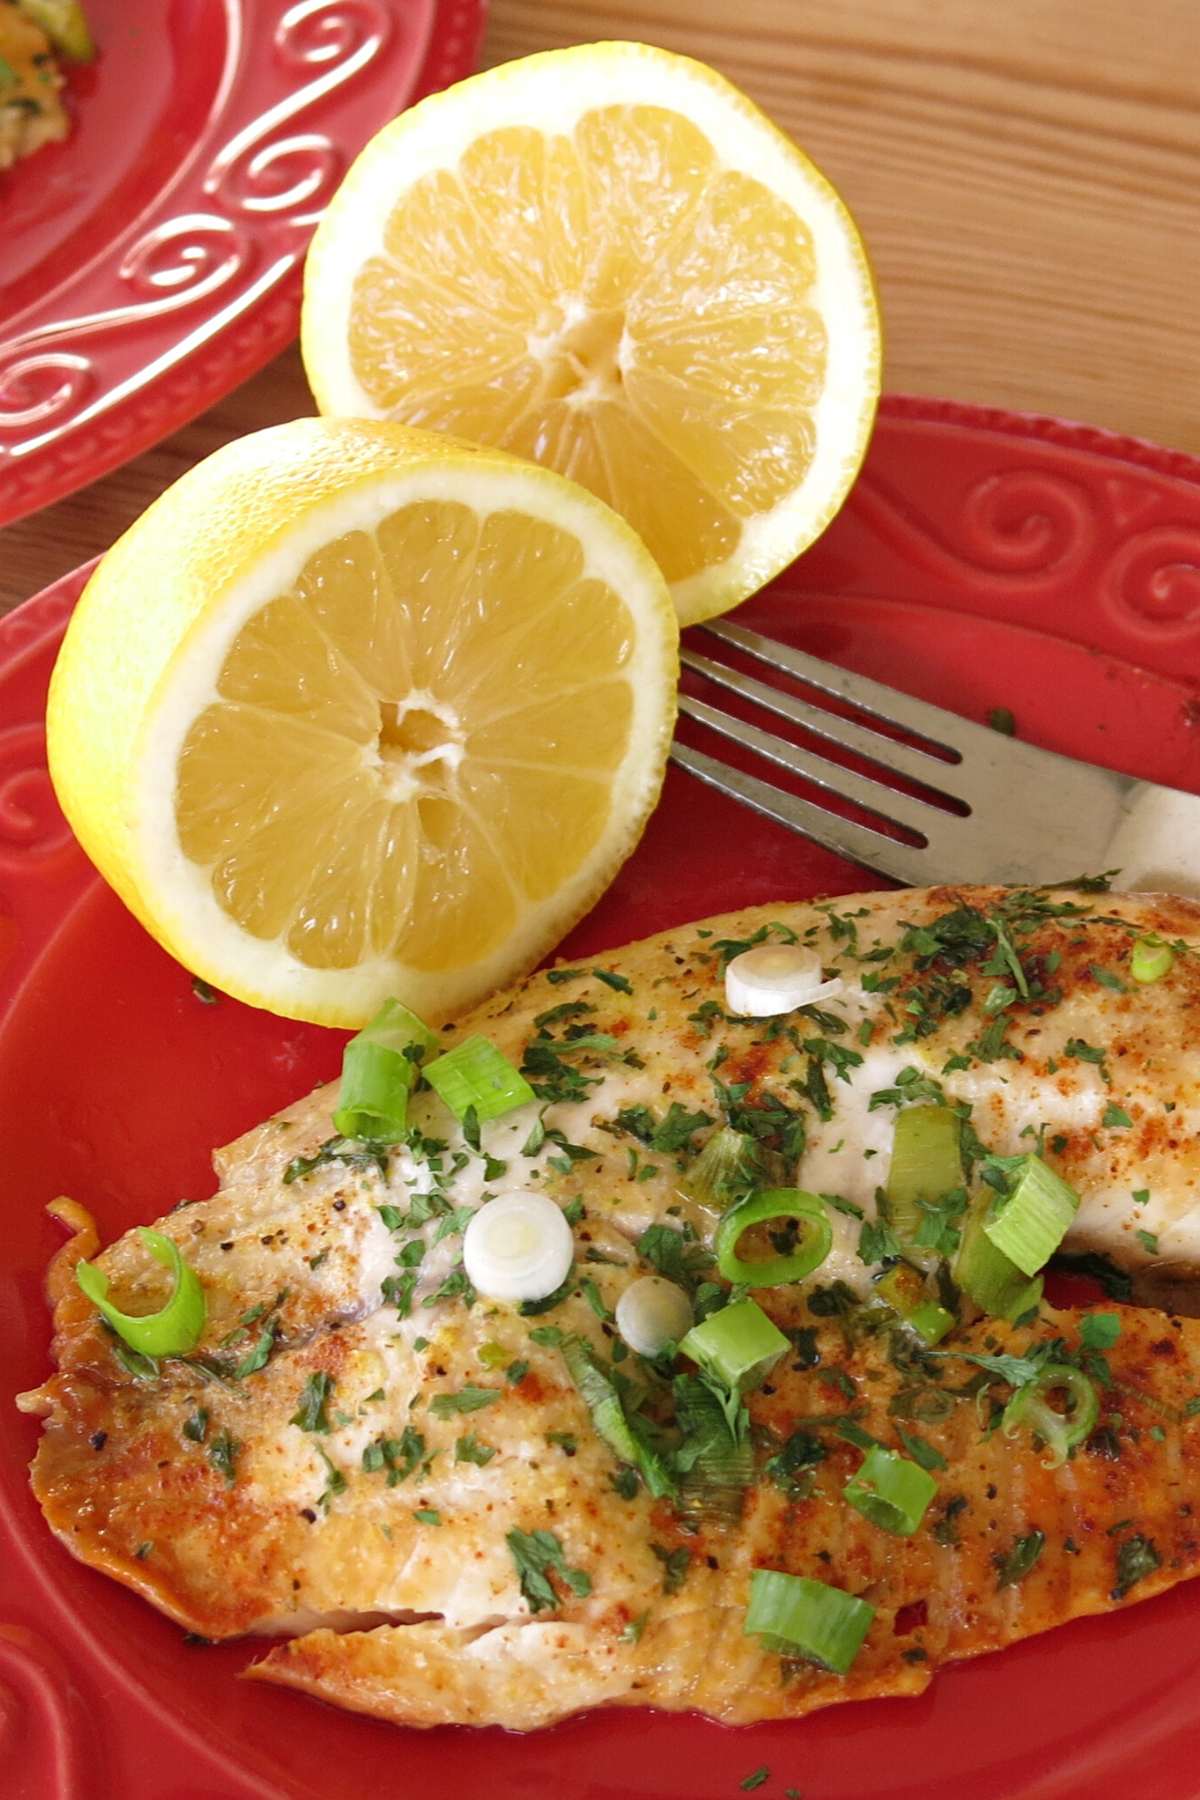 Oven-baked lemon pepper tilapia on a red plate with a fork and a lemon that has been cut in half.